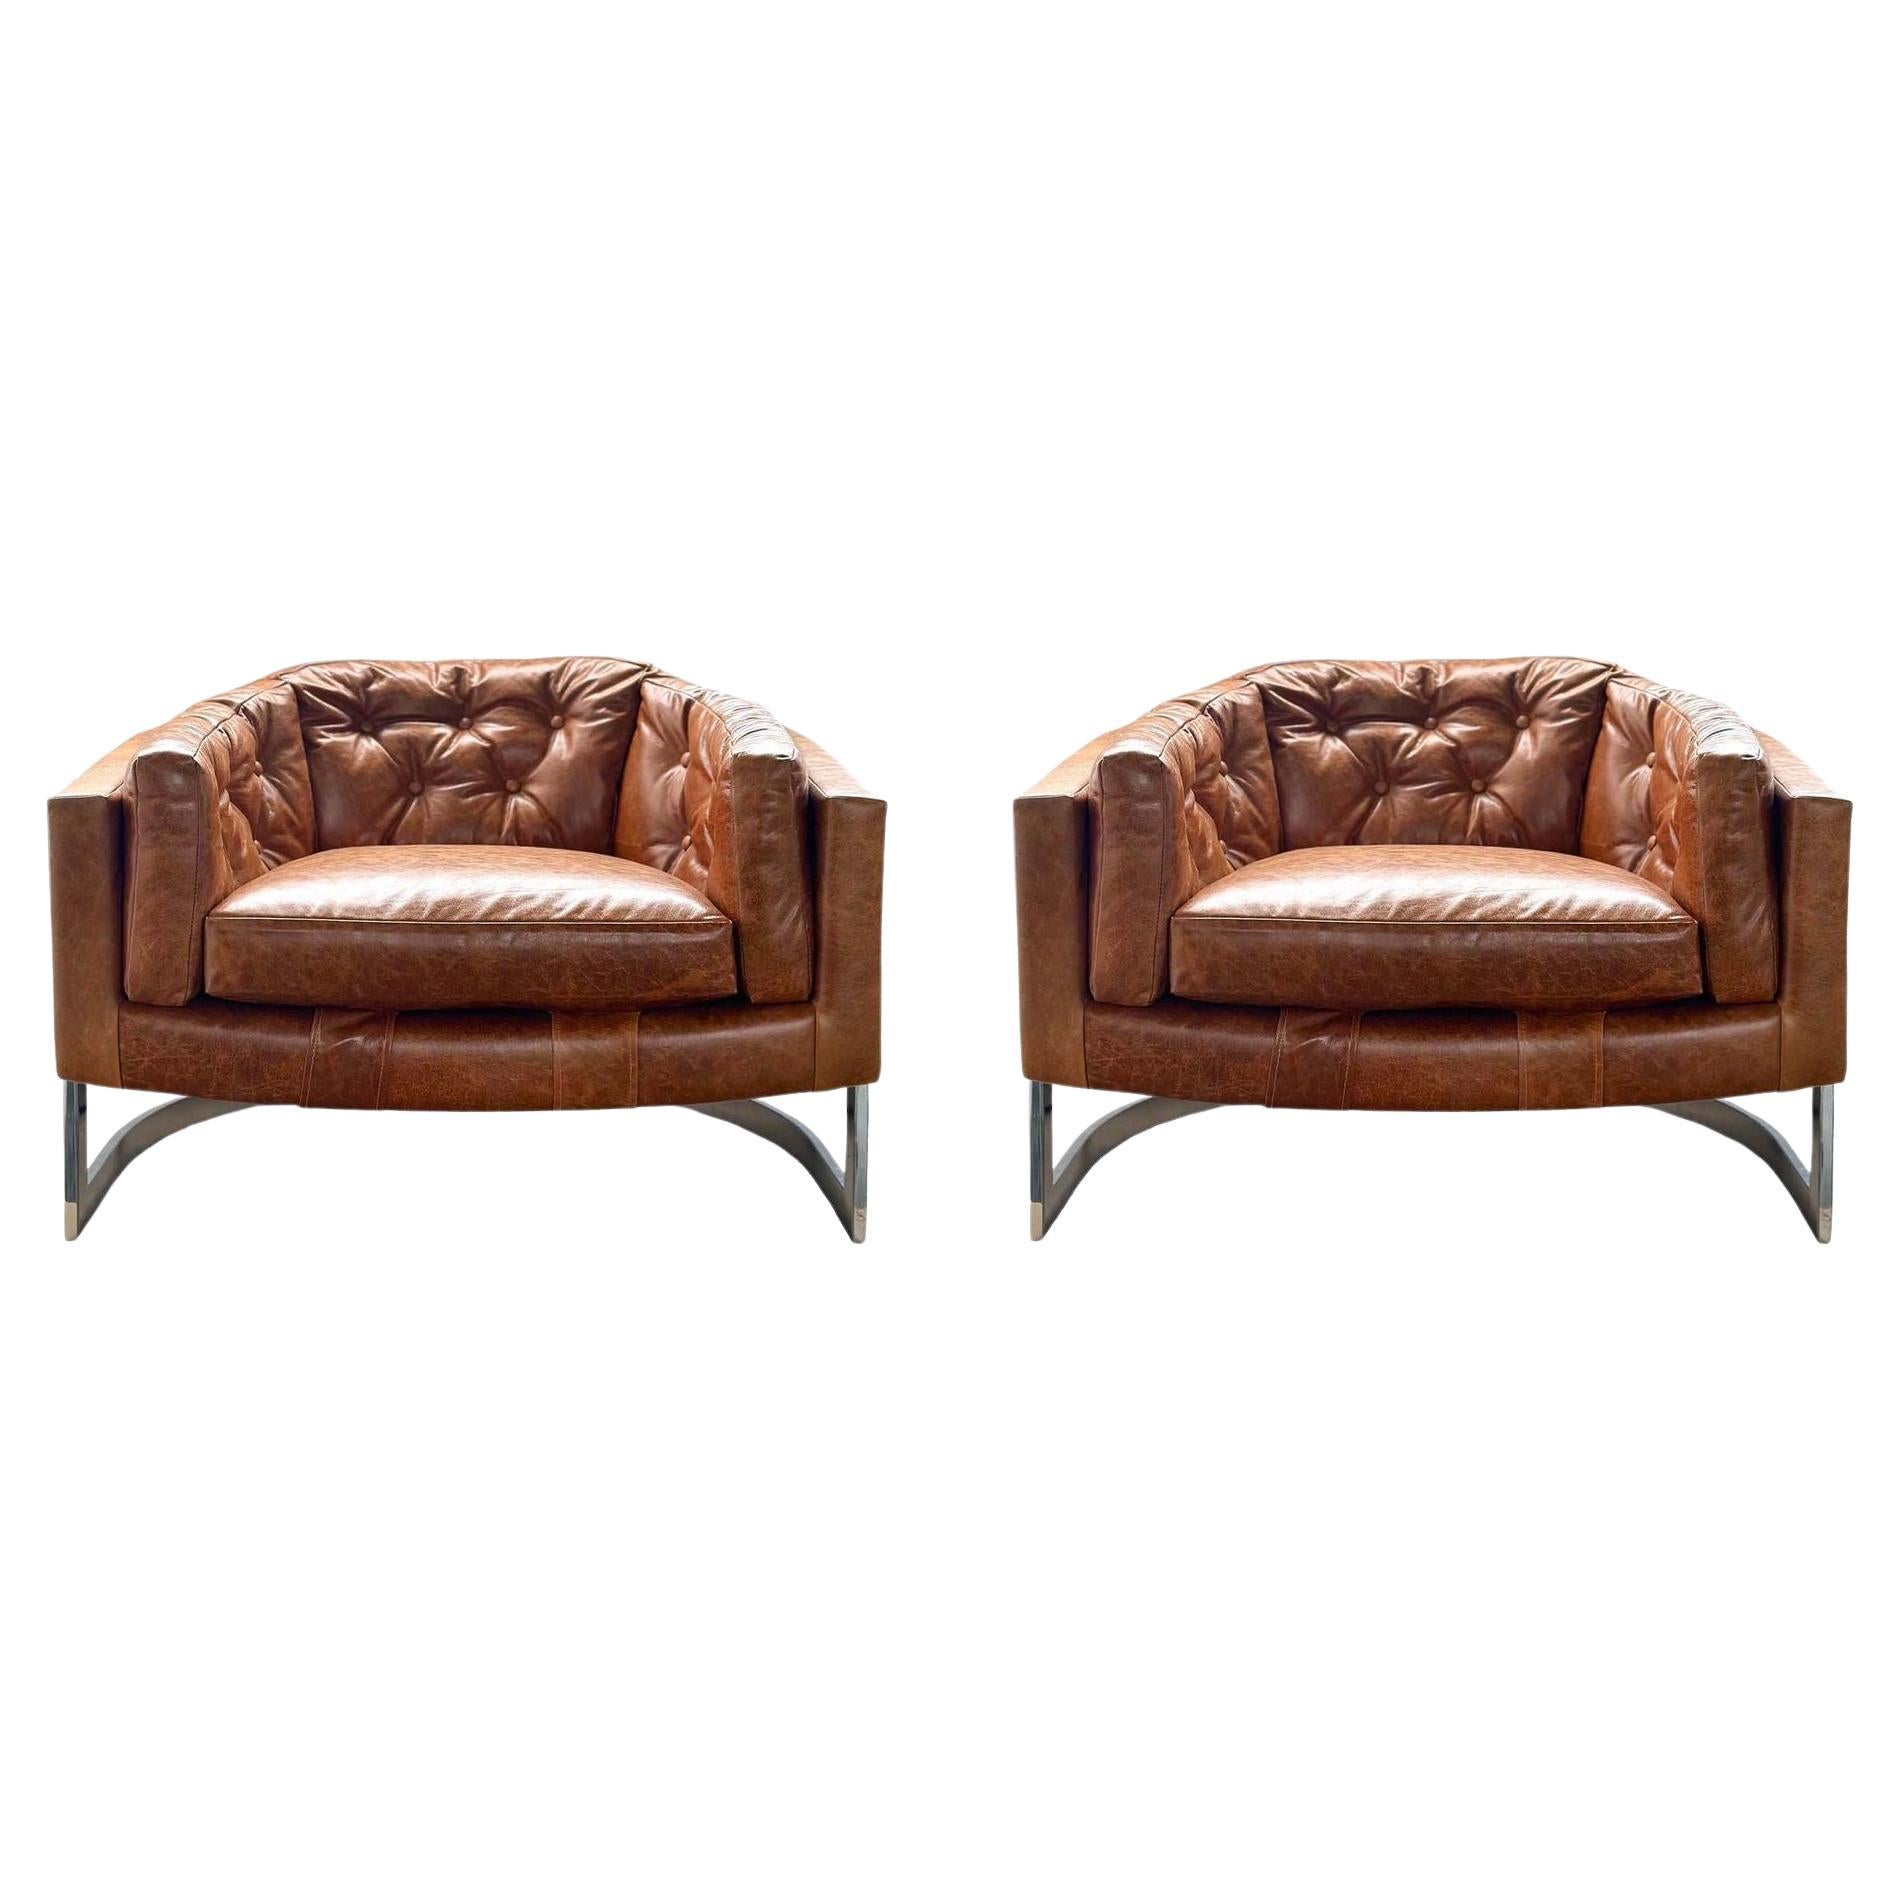 Pair of Vintage Leather Chairs in the Style of Milo Baughman